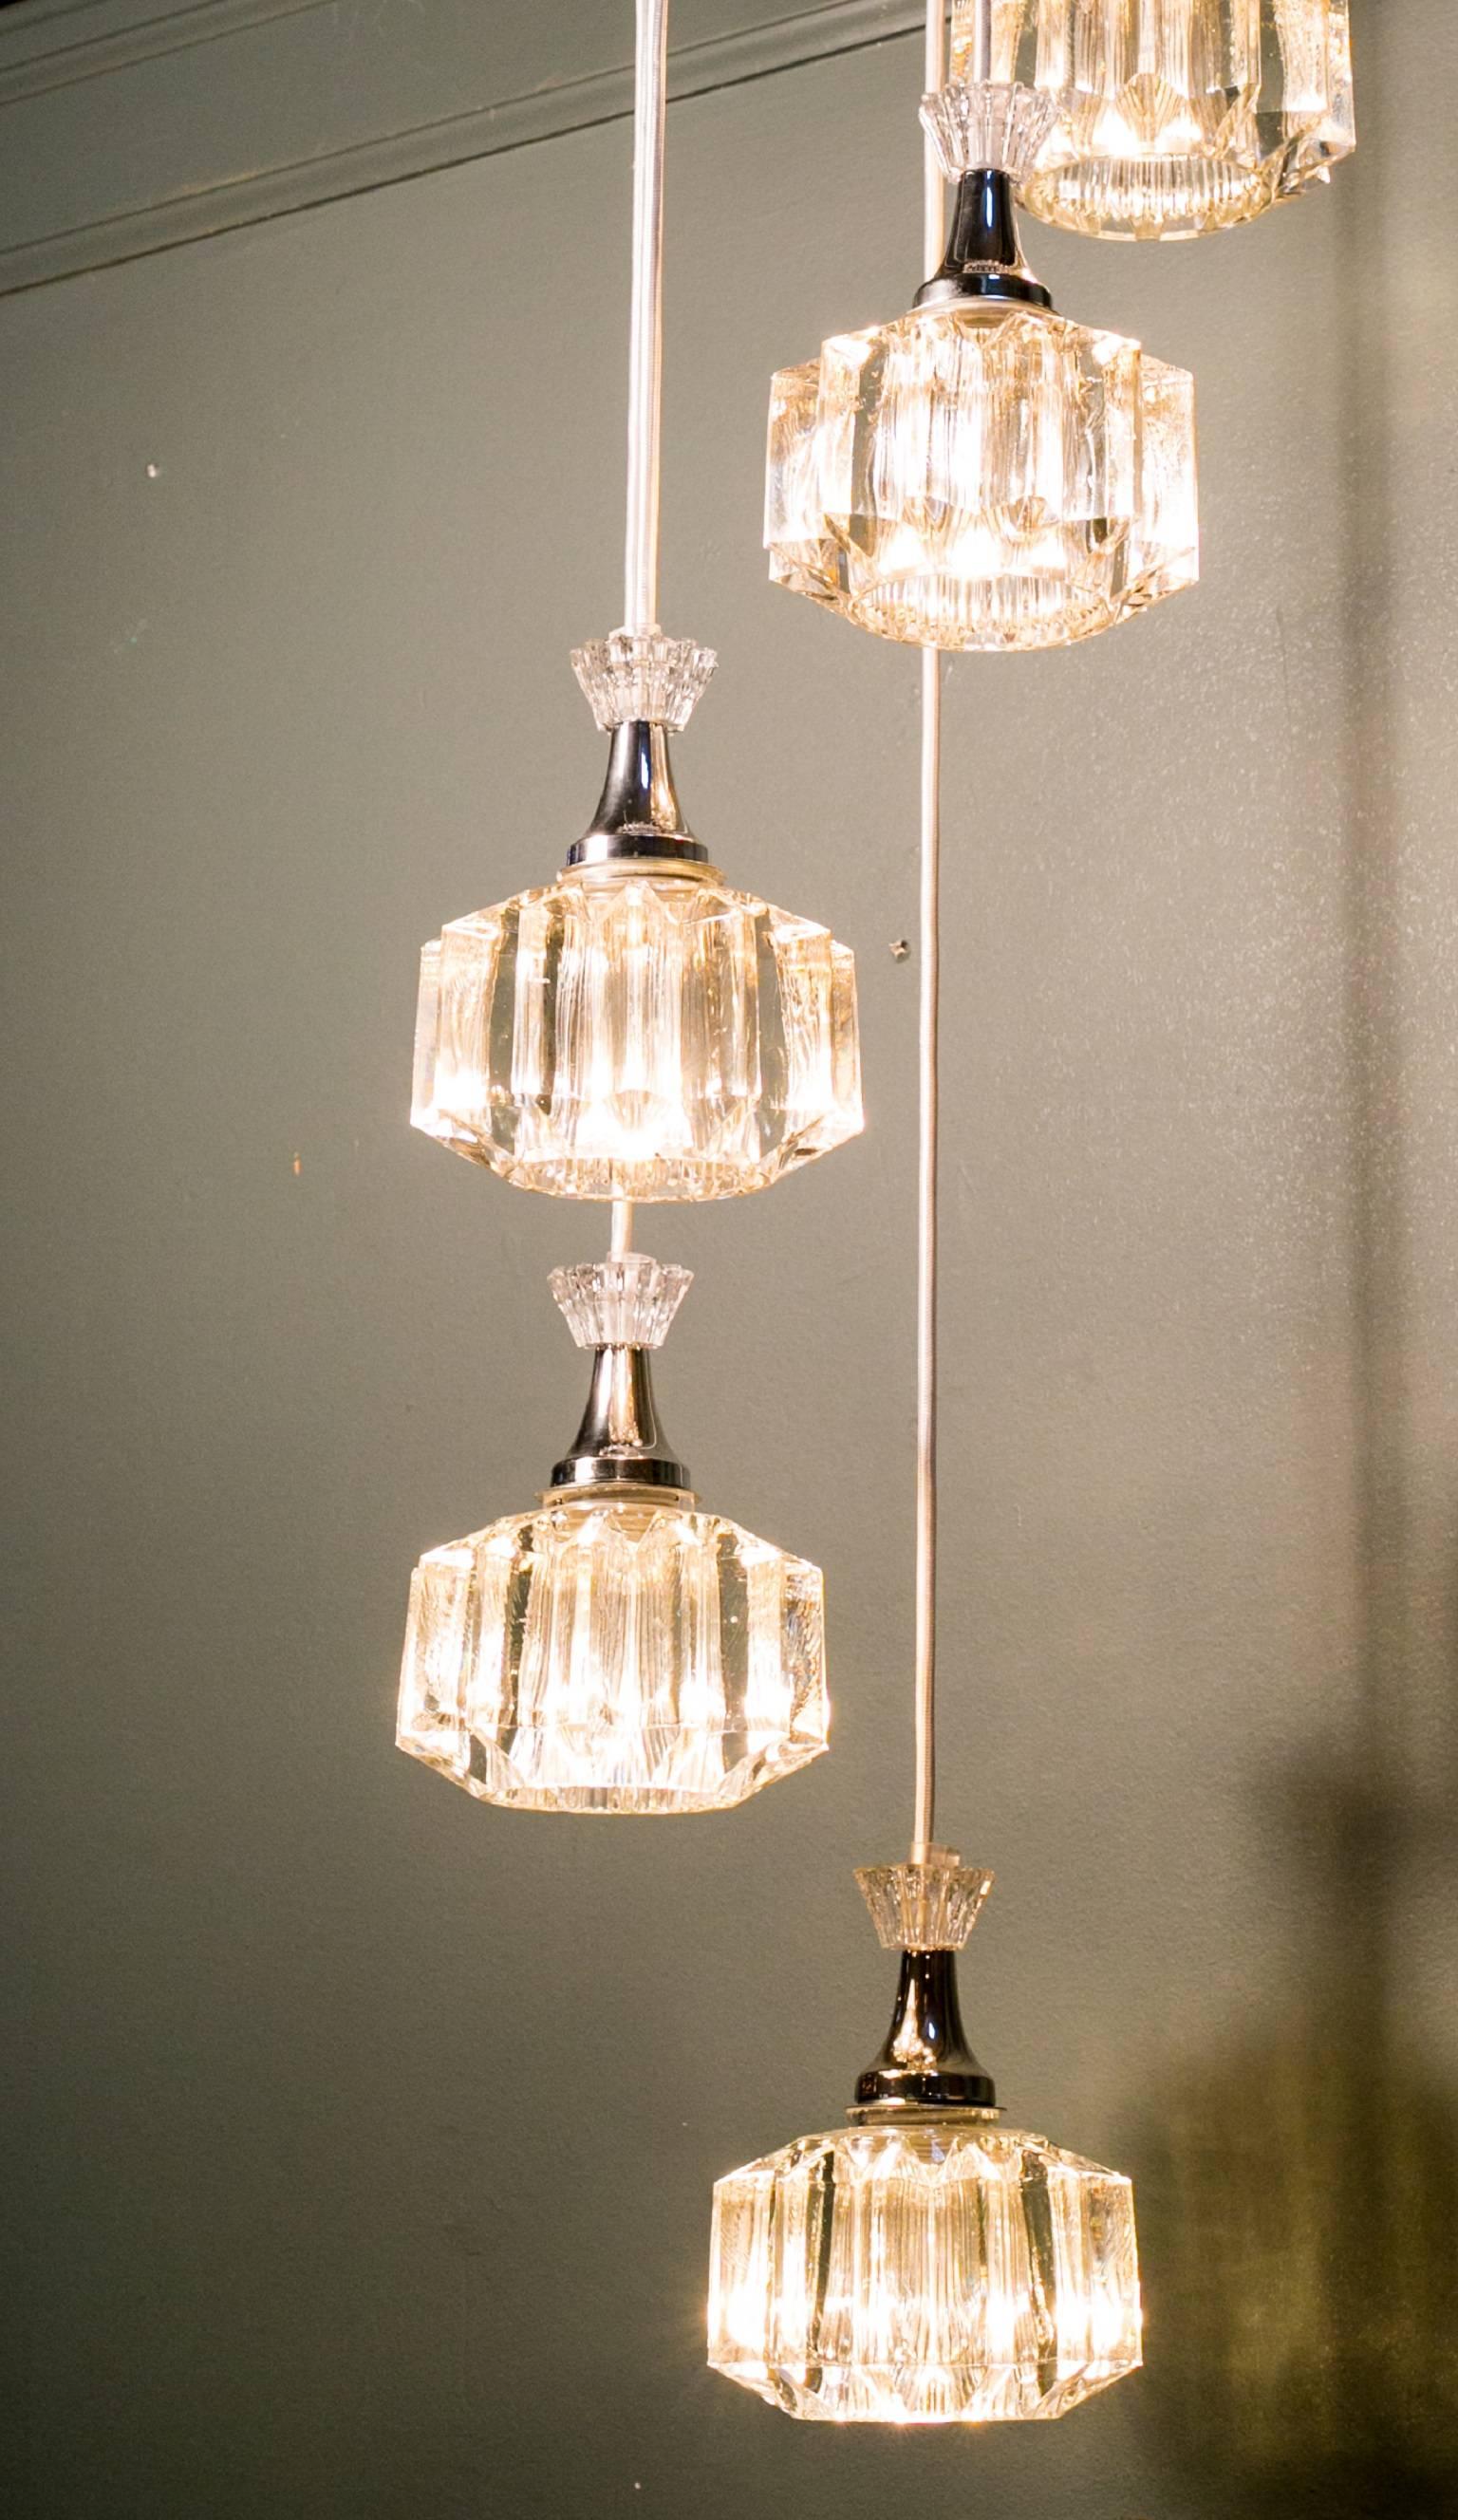 Waterfall style light, circa 1960. Features five blow molded lights on one canopy with polished nickel hardware and banding. Beautiful quality with heavy glass. Newly rewired in the USA with all UL approved parts. Length of the pendants can be